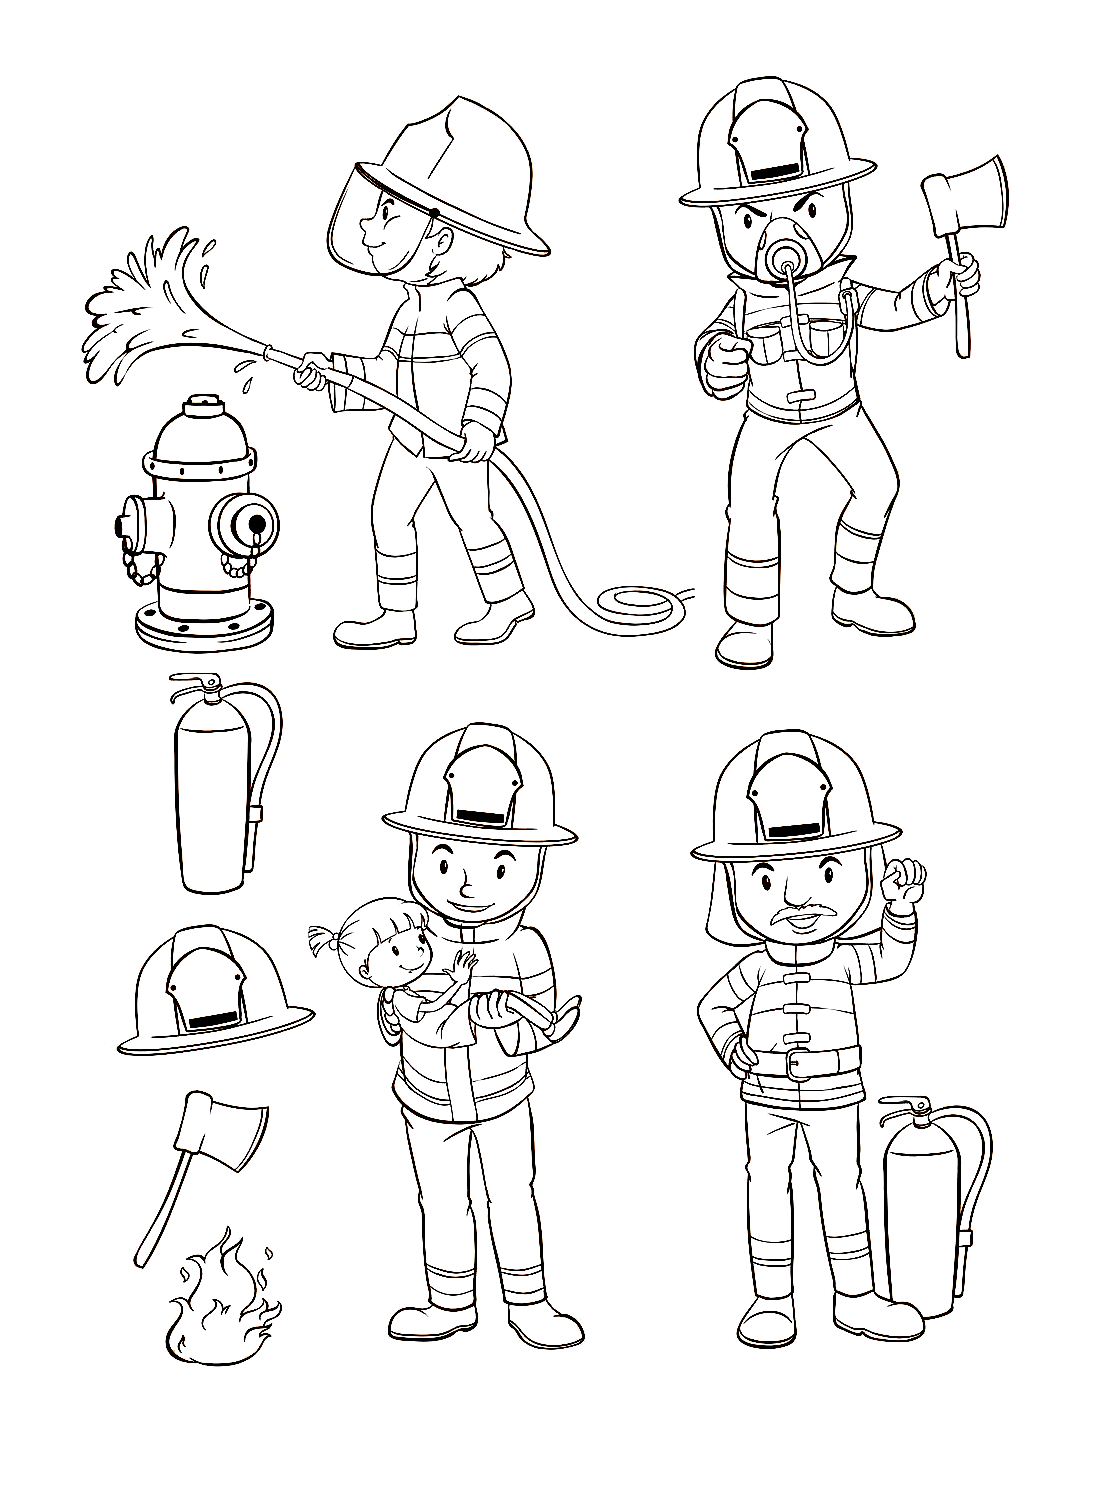 Fireman coloring pages for preschoolers